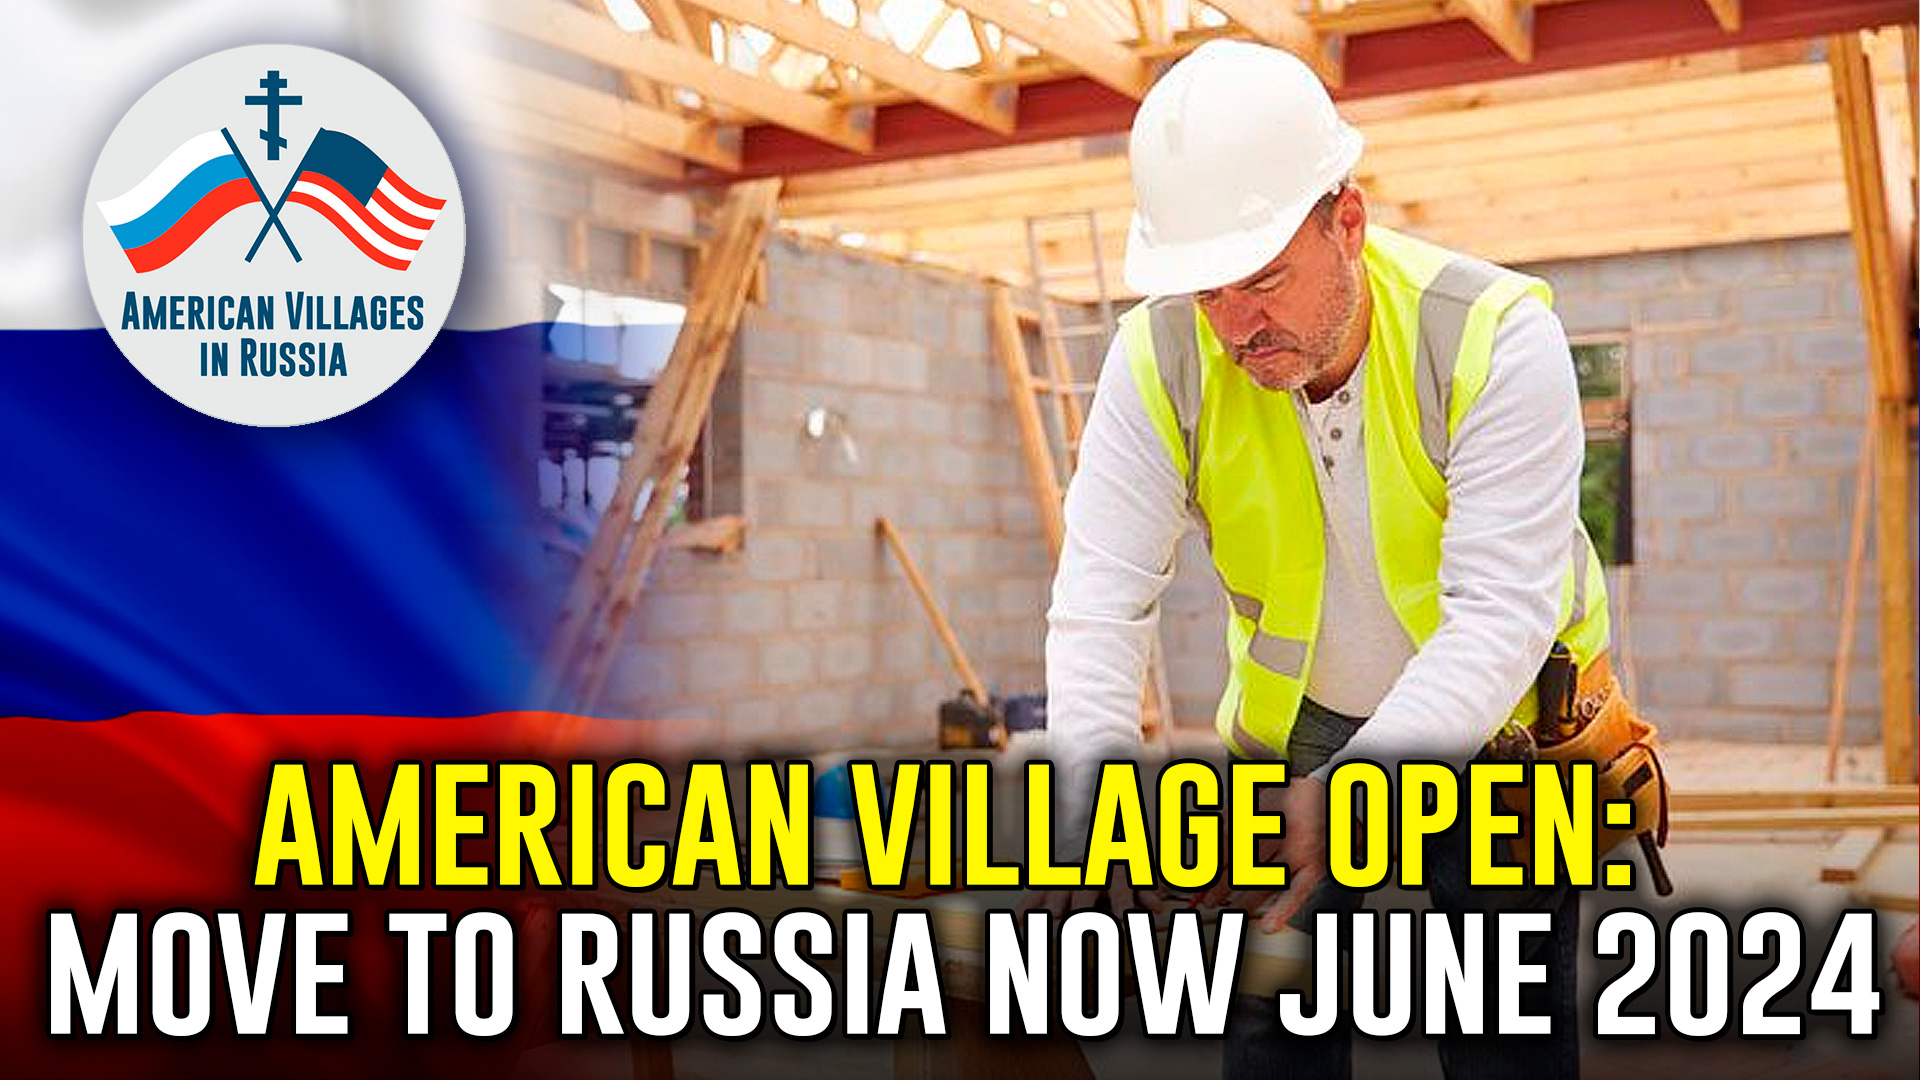 "American Village Open: Move to Russia now June 2024"